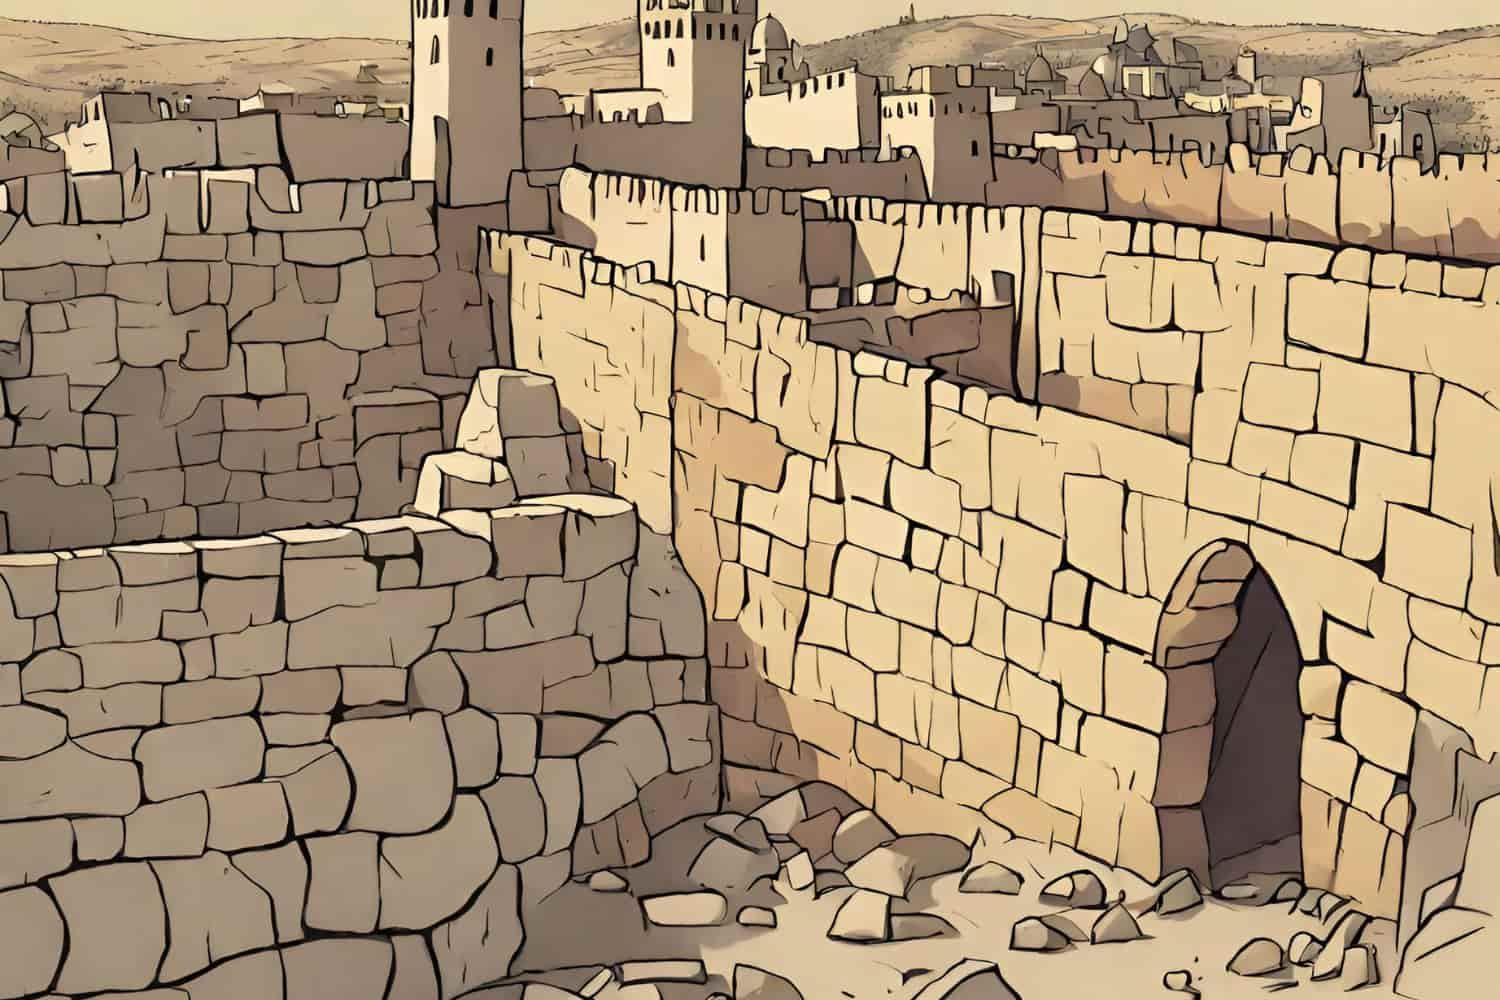 Lesson%20-%20Nehemiah%20and%20the%20wall%20of%20Jerusalem-63c8f746 Lessons